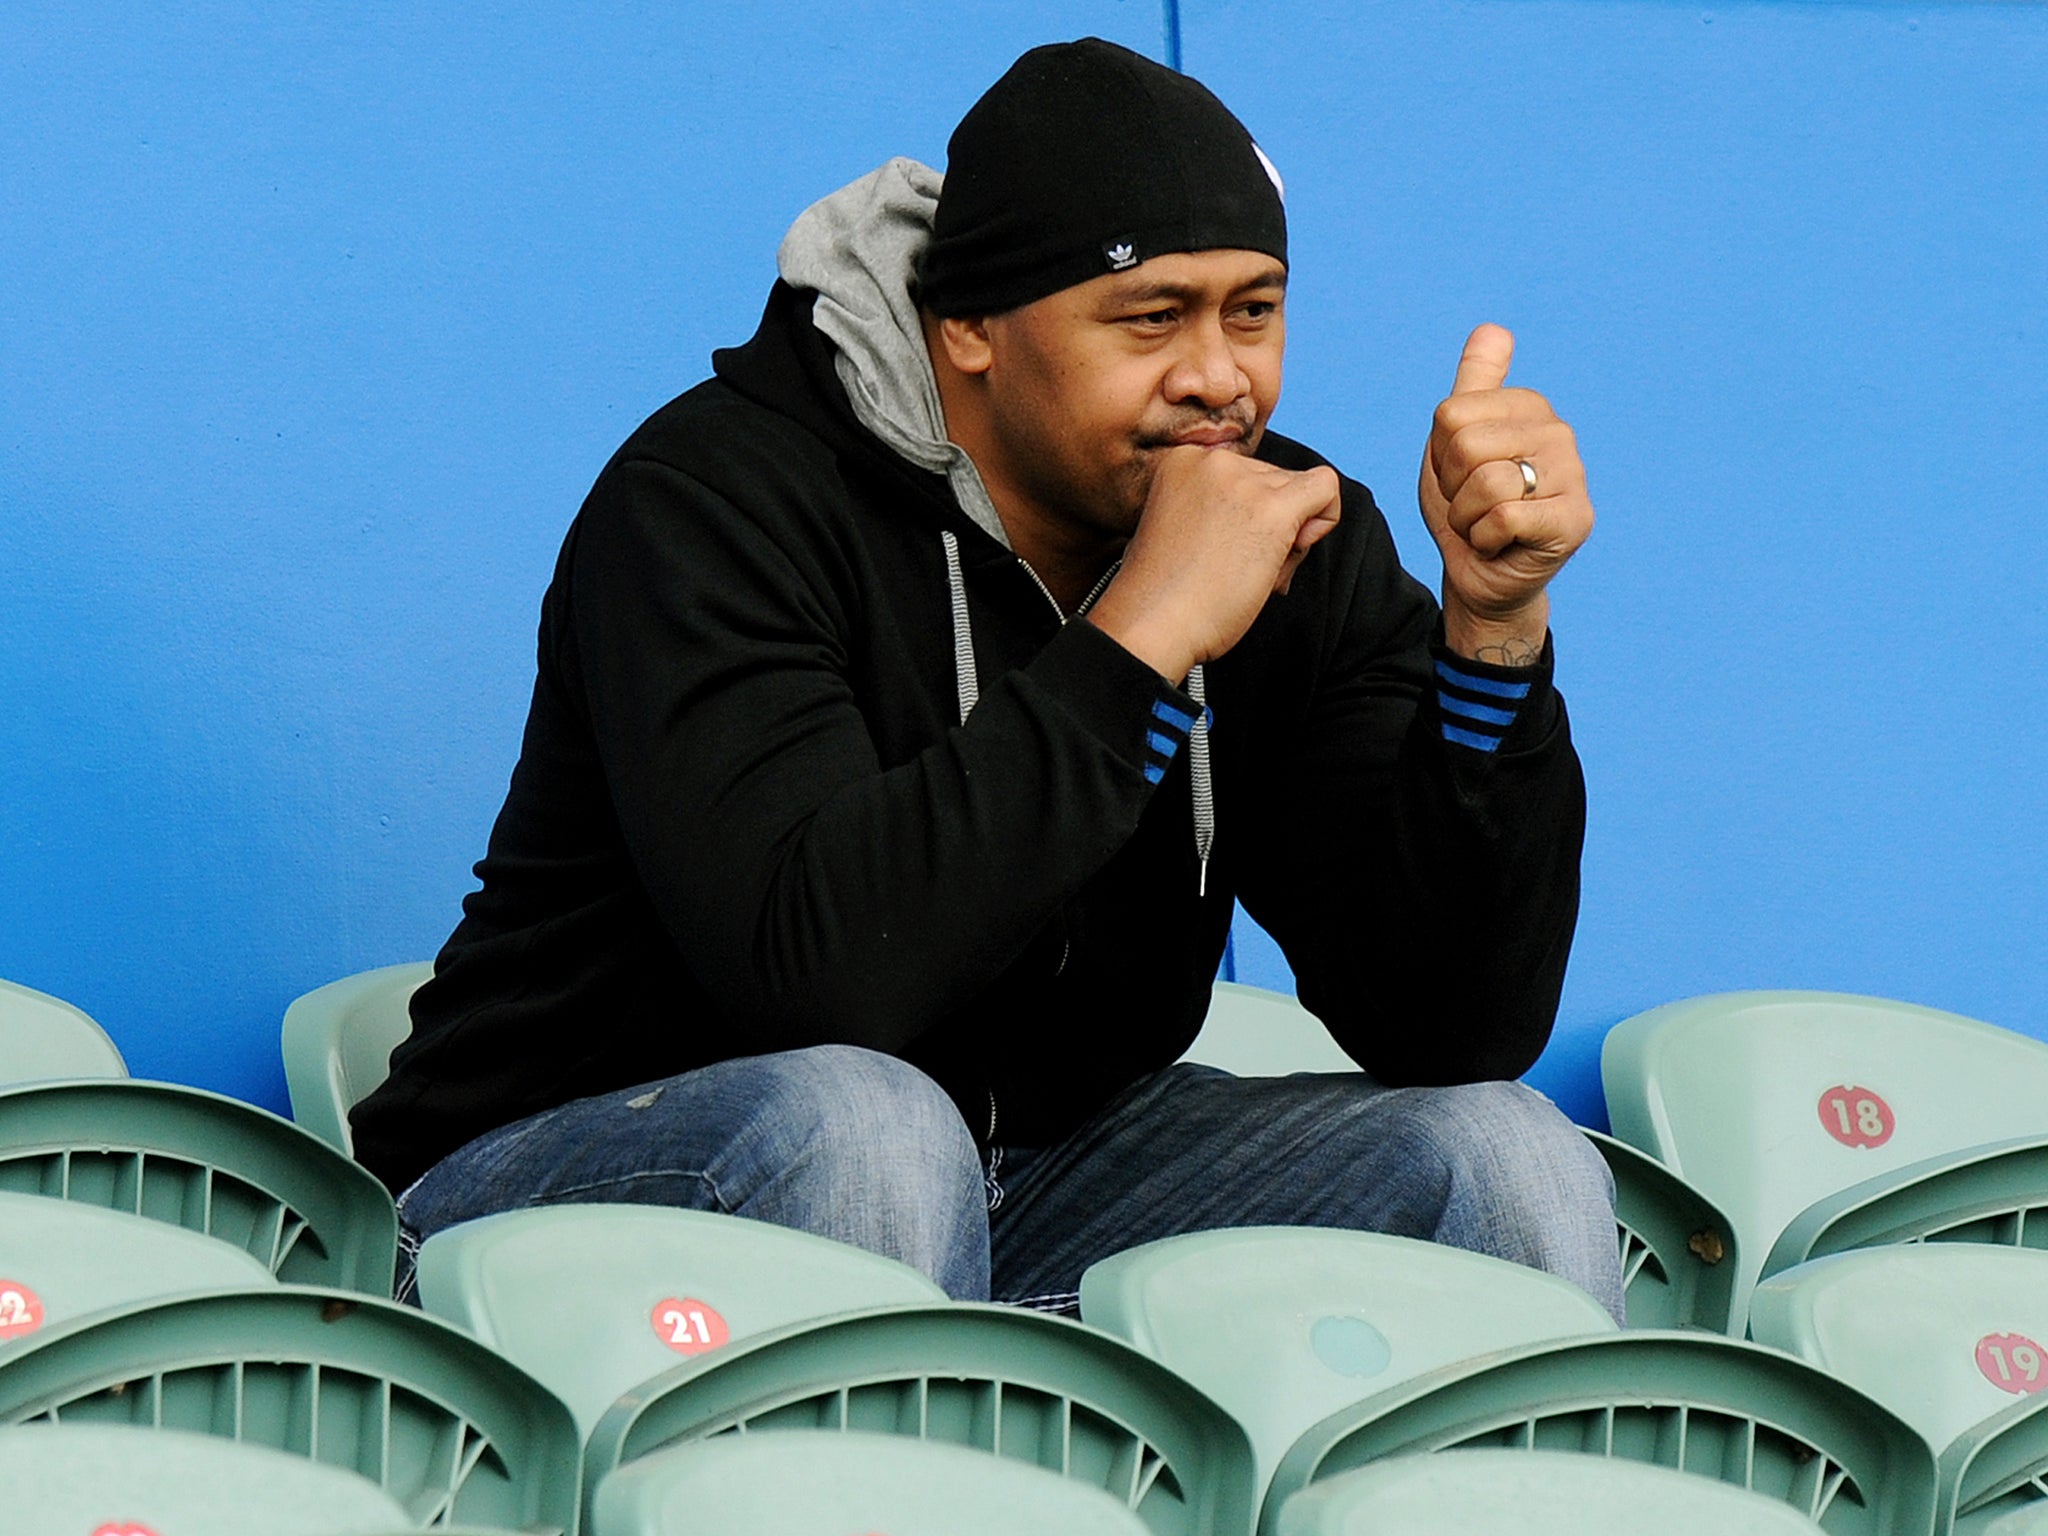 Jonah Lomu in 2011, just weeks after he suffered a major renal failure